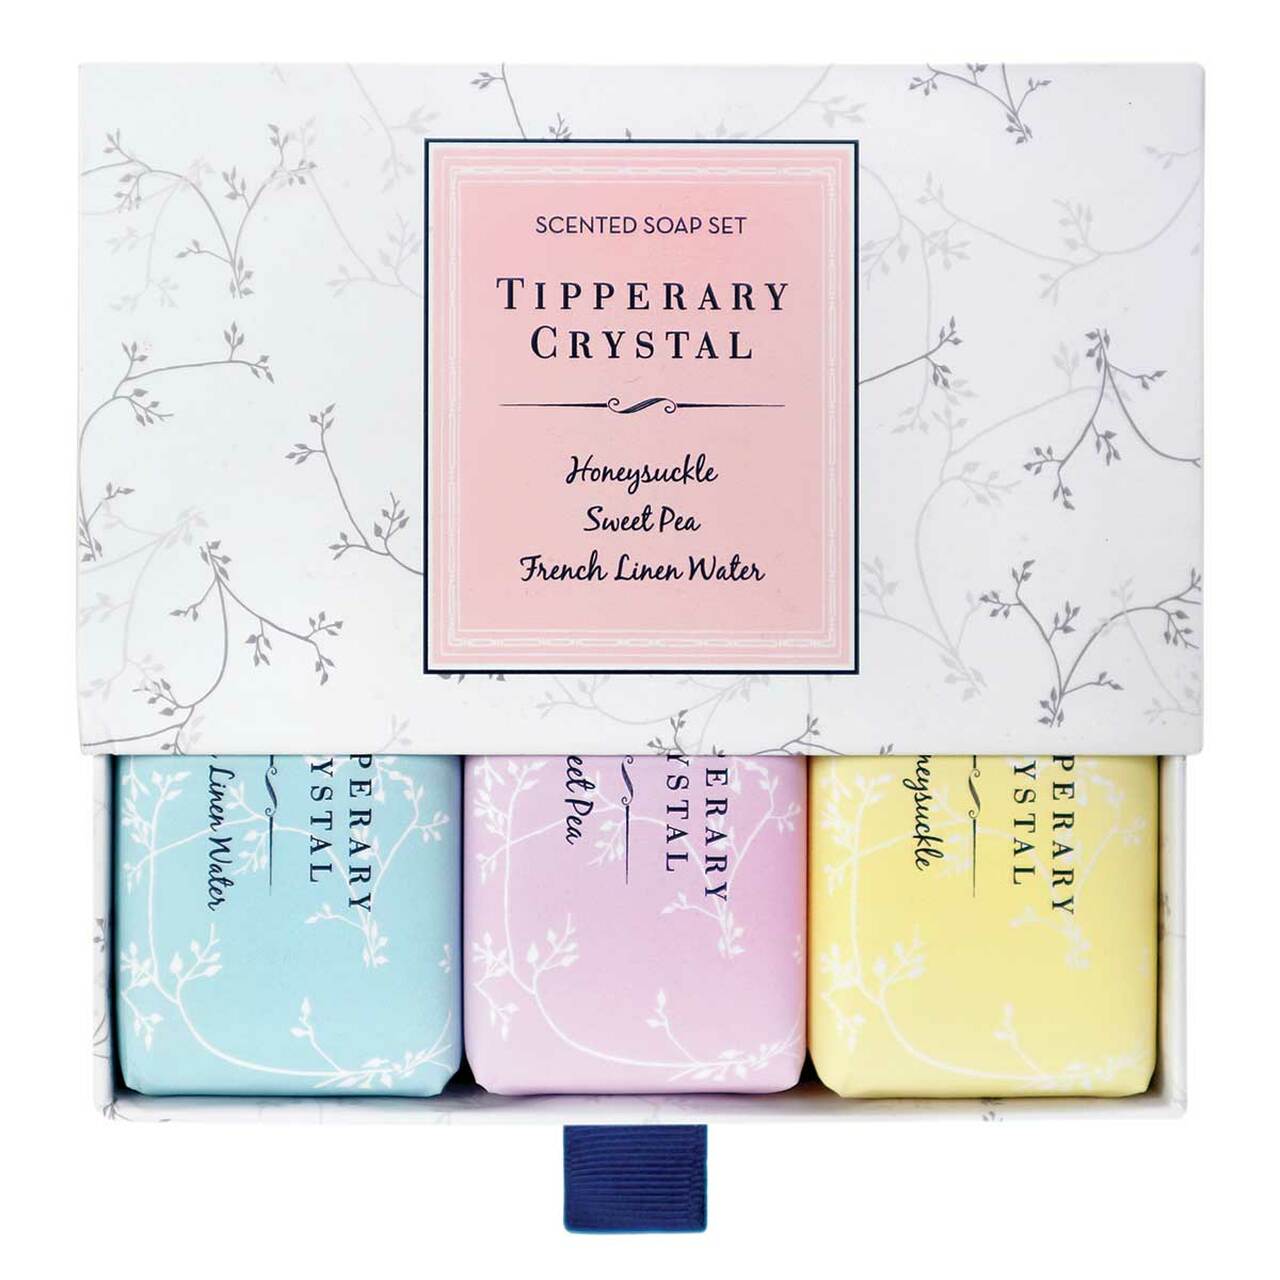 Tipperary Crystal Set Three Scented Soaps Honeysuckle, sweet pea & french linen